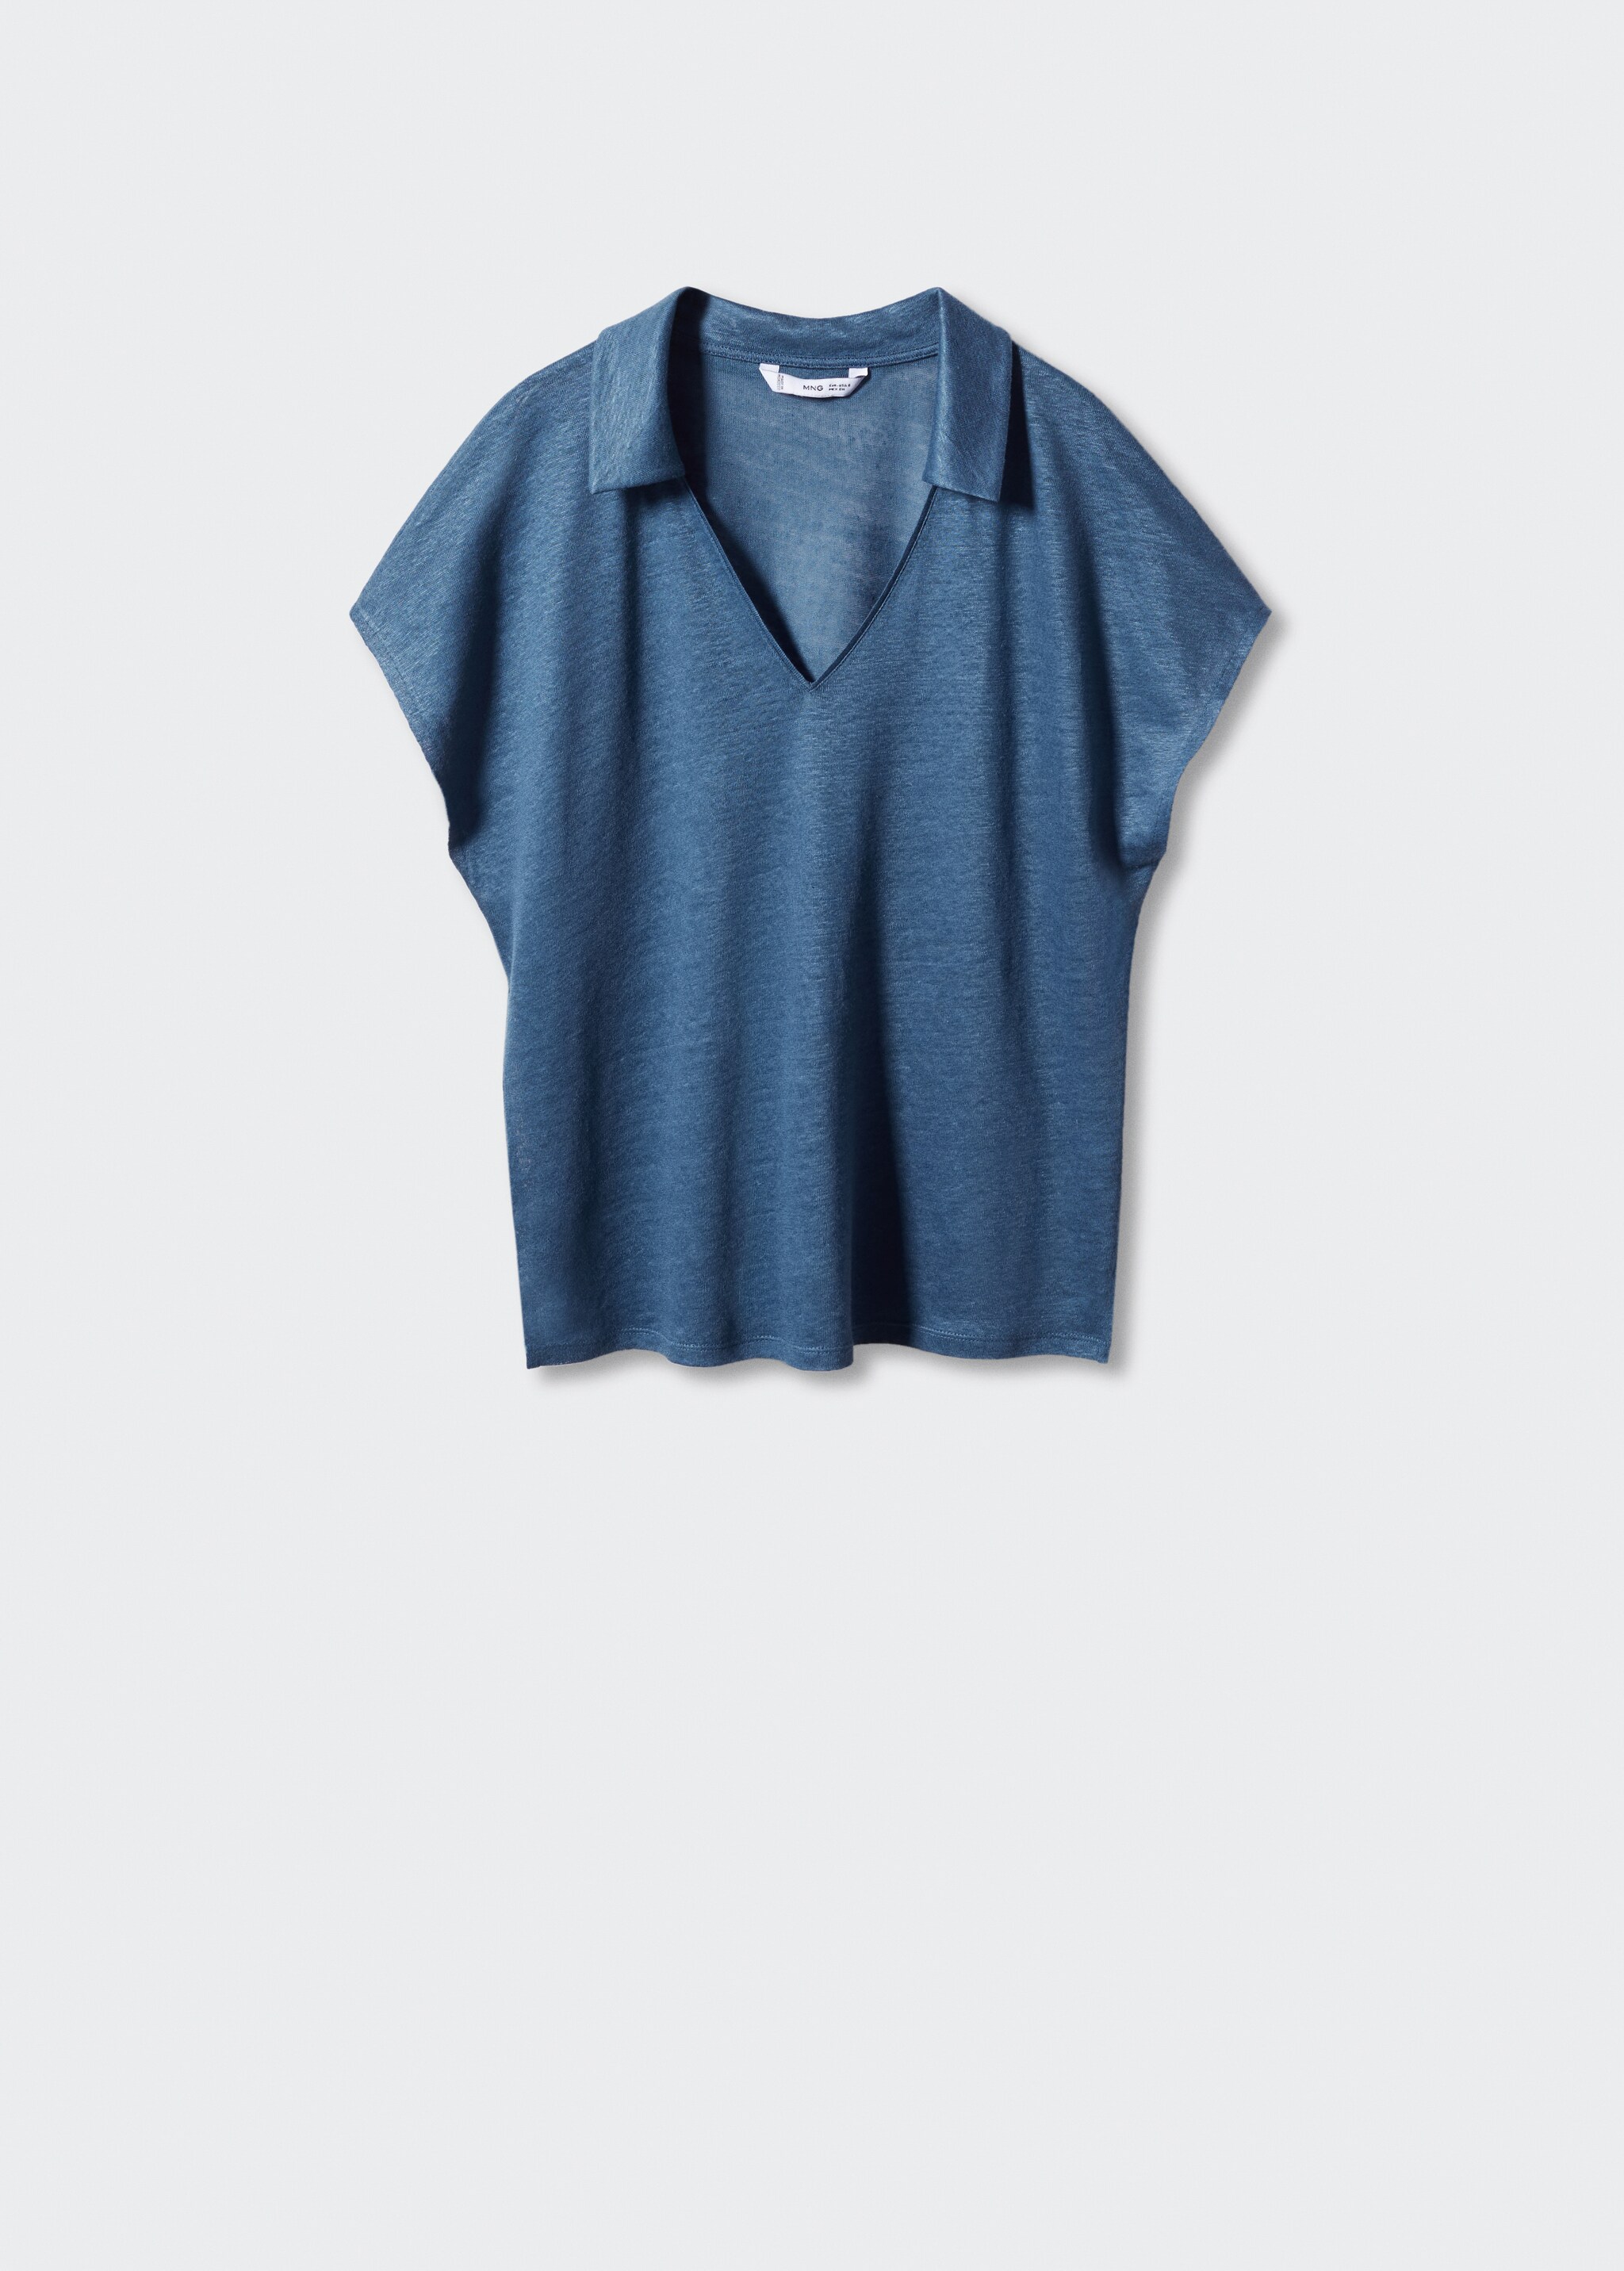 V-neck linen polo shirt - Article without model